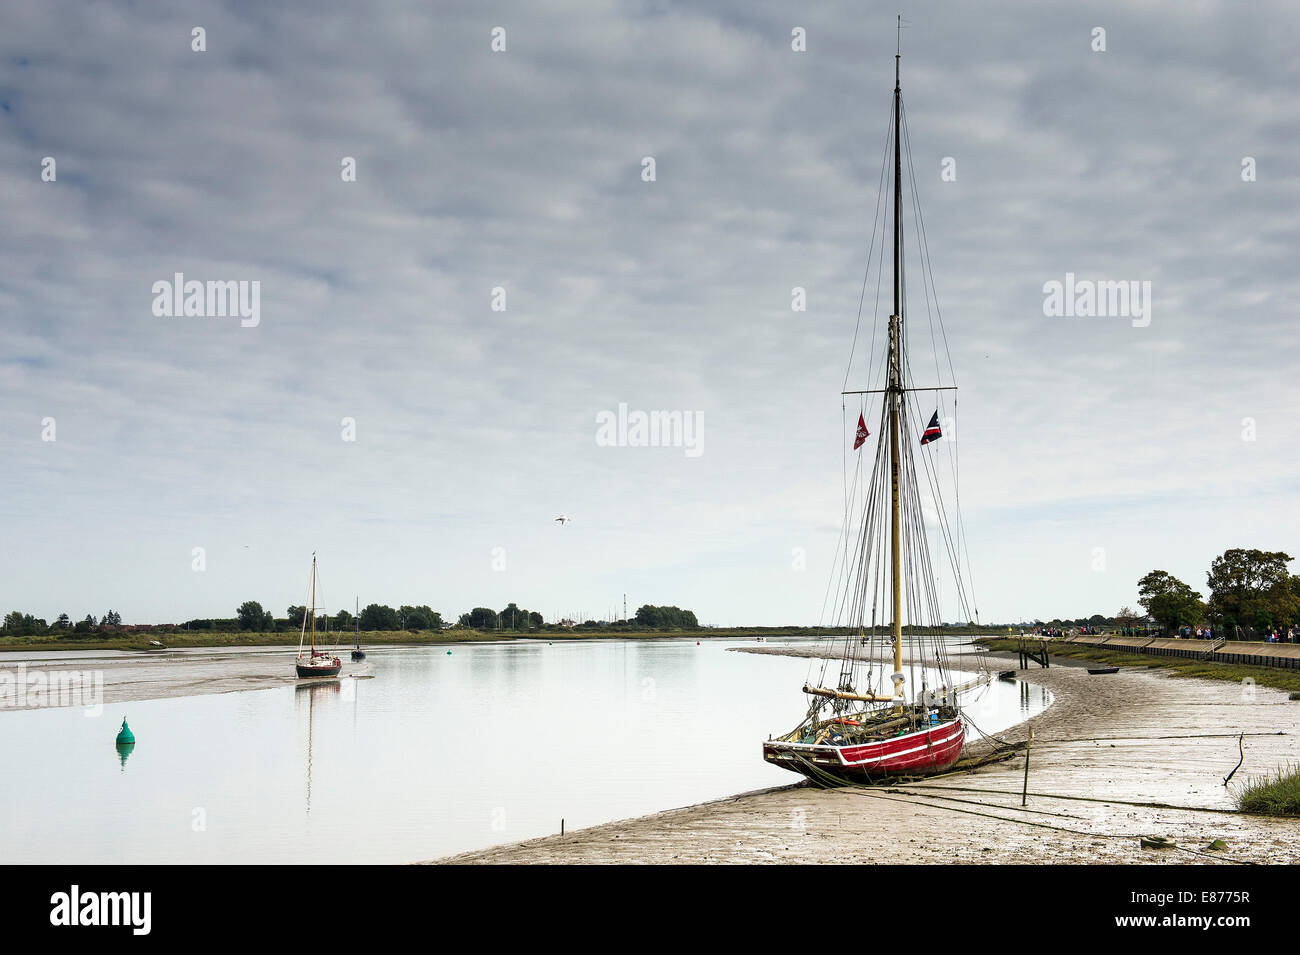 The old wooden fishing smack Telegraph moored on the Blackwater River in Essex. Stock Photo